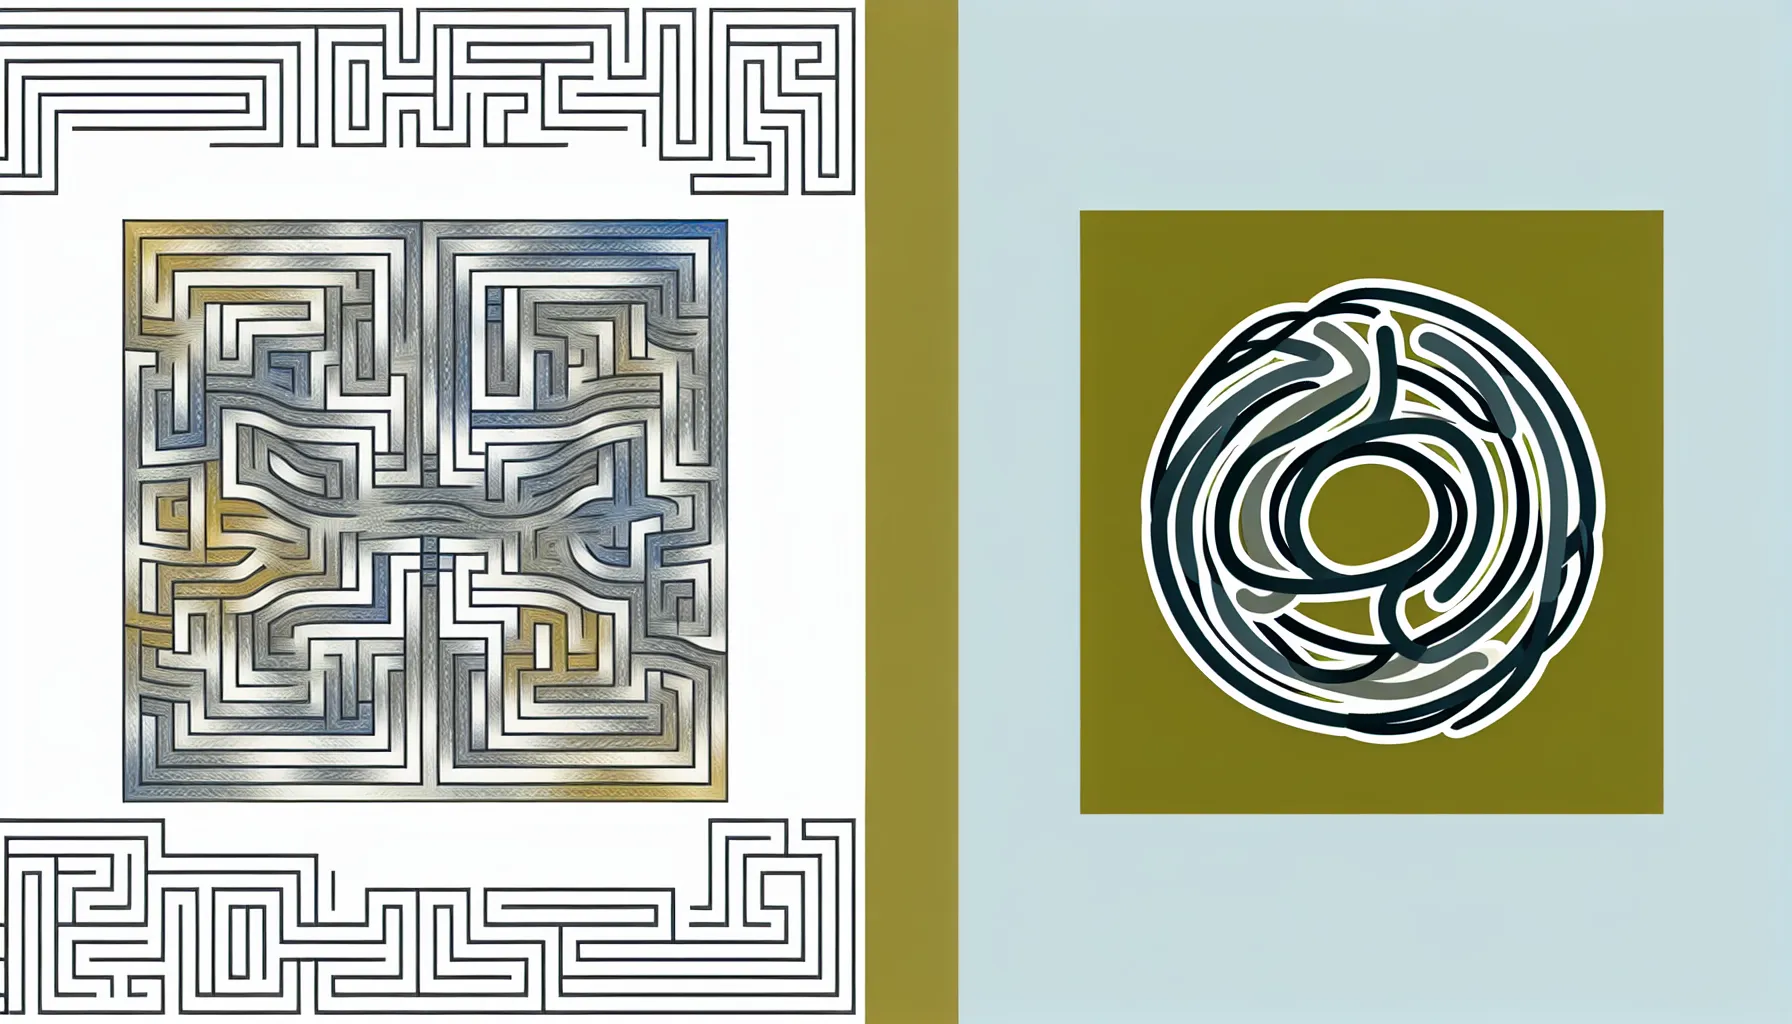 <strong>From Entanglement to Enlightenment:</strong> This image embodies the journey from the convoluted maze of distrust to the harmonious tapestry of restored faith, mirroring the transformative process of addressing and overcoming trust issues in relationships.